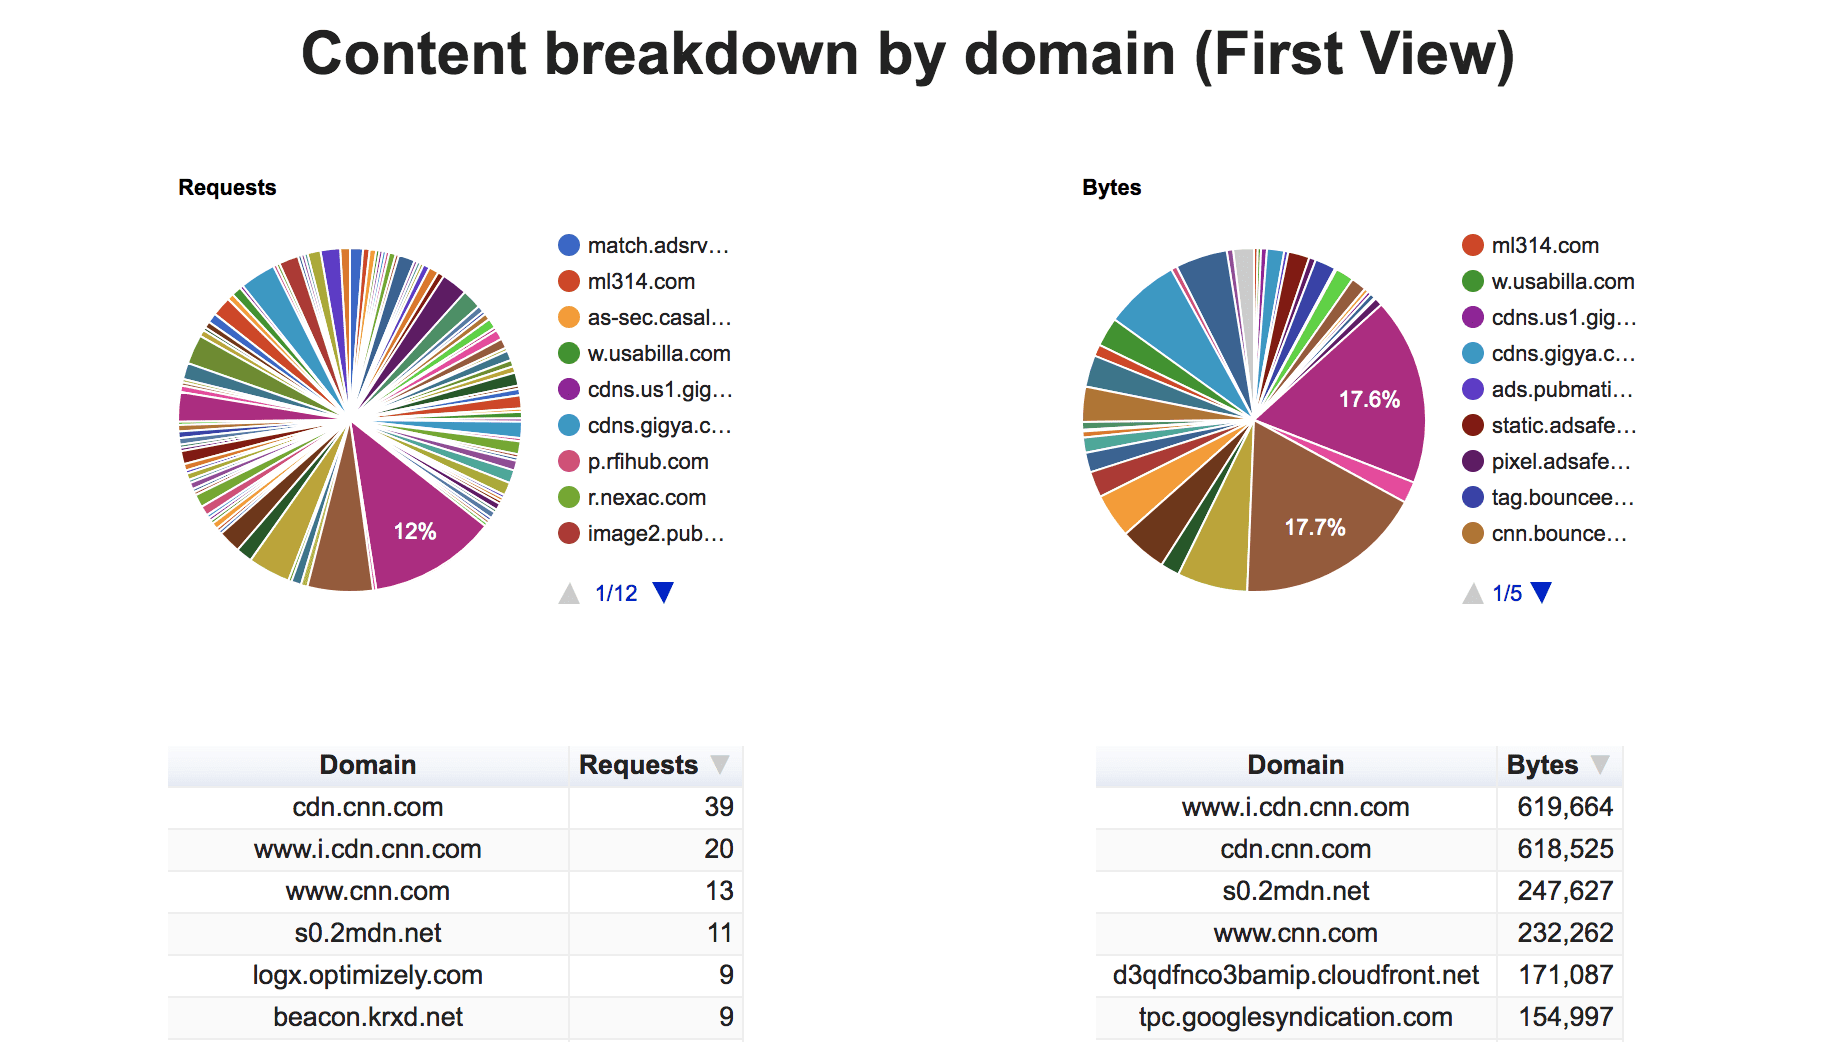 content breakdown by domain (first view).
Shows the percentage of requests and bytes for each third-party